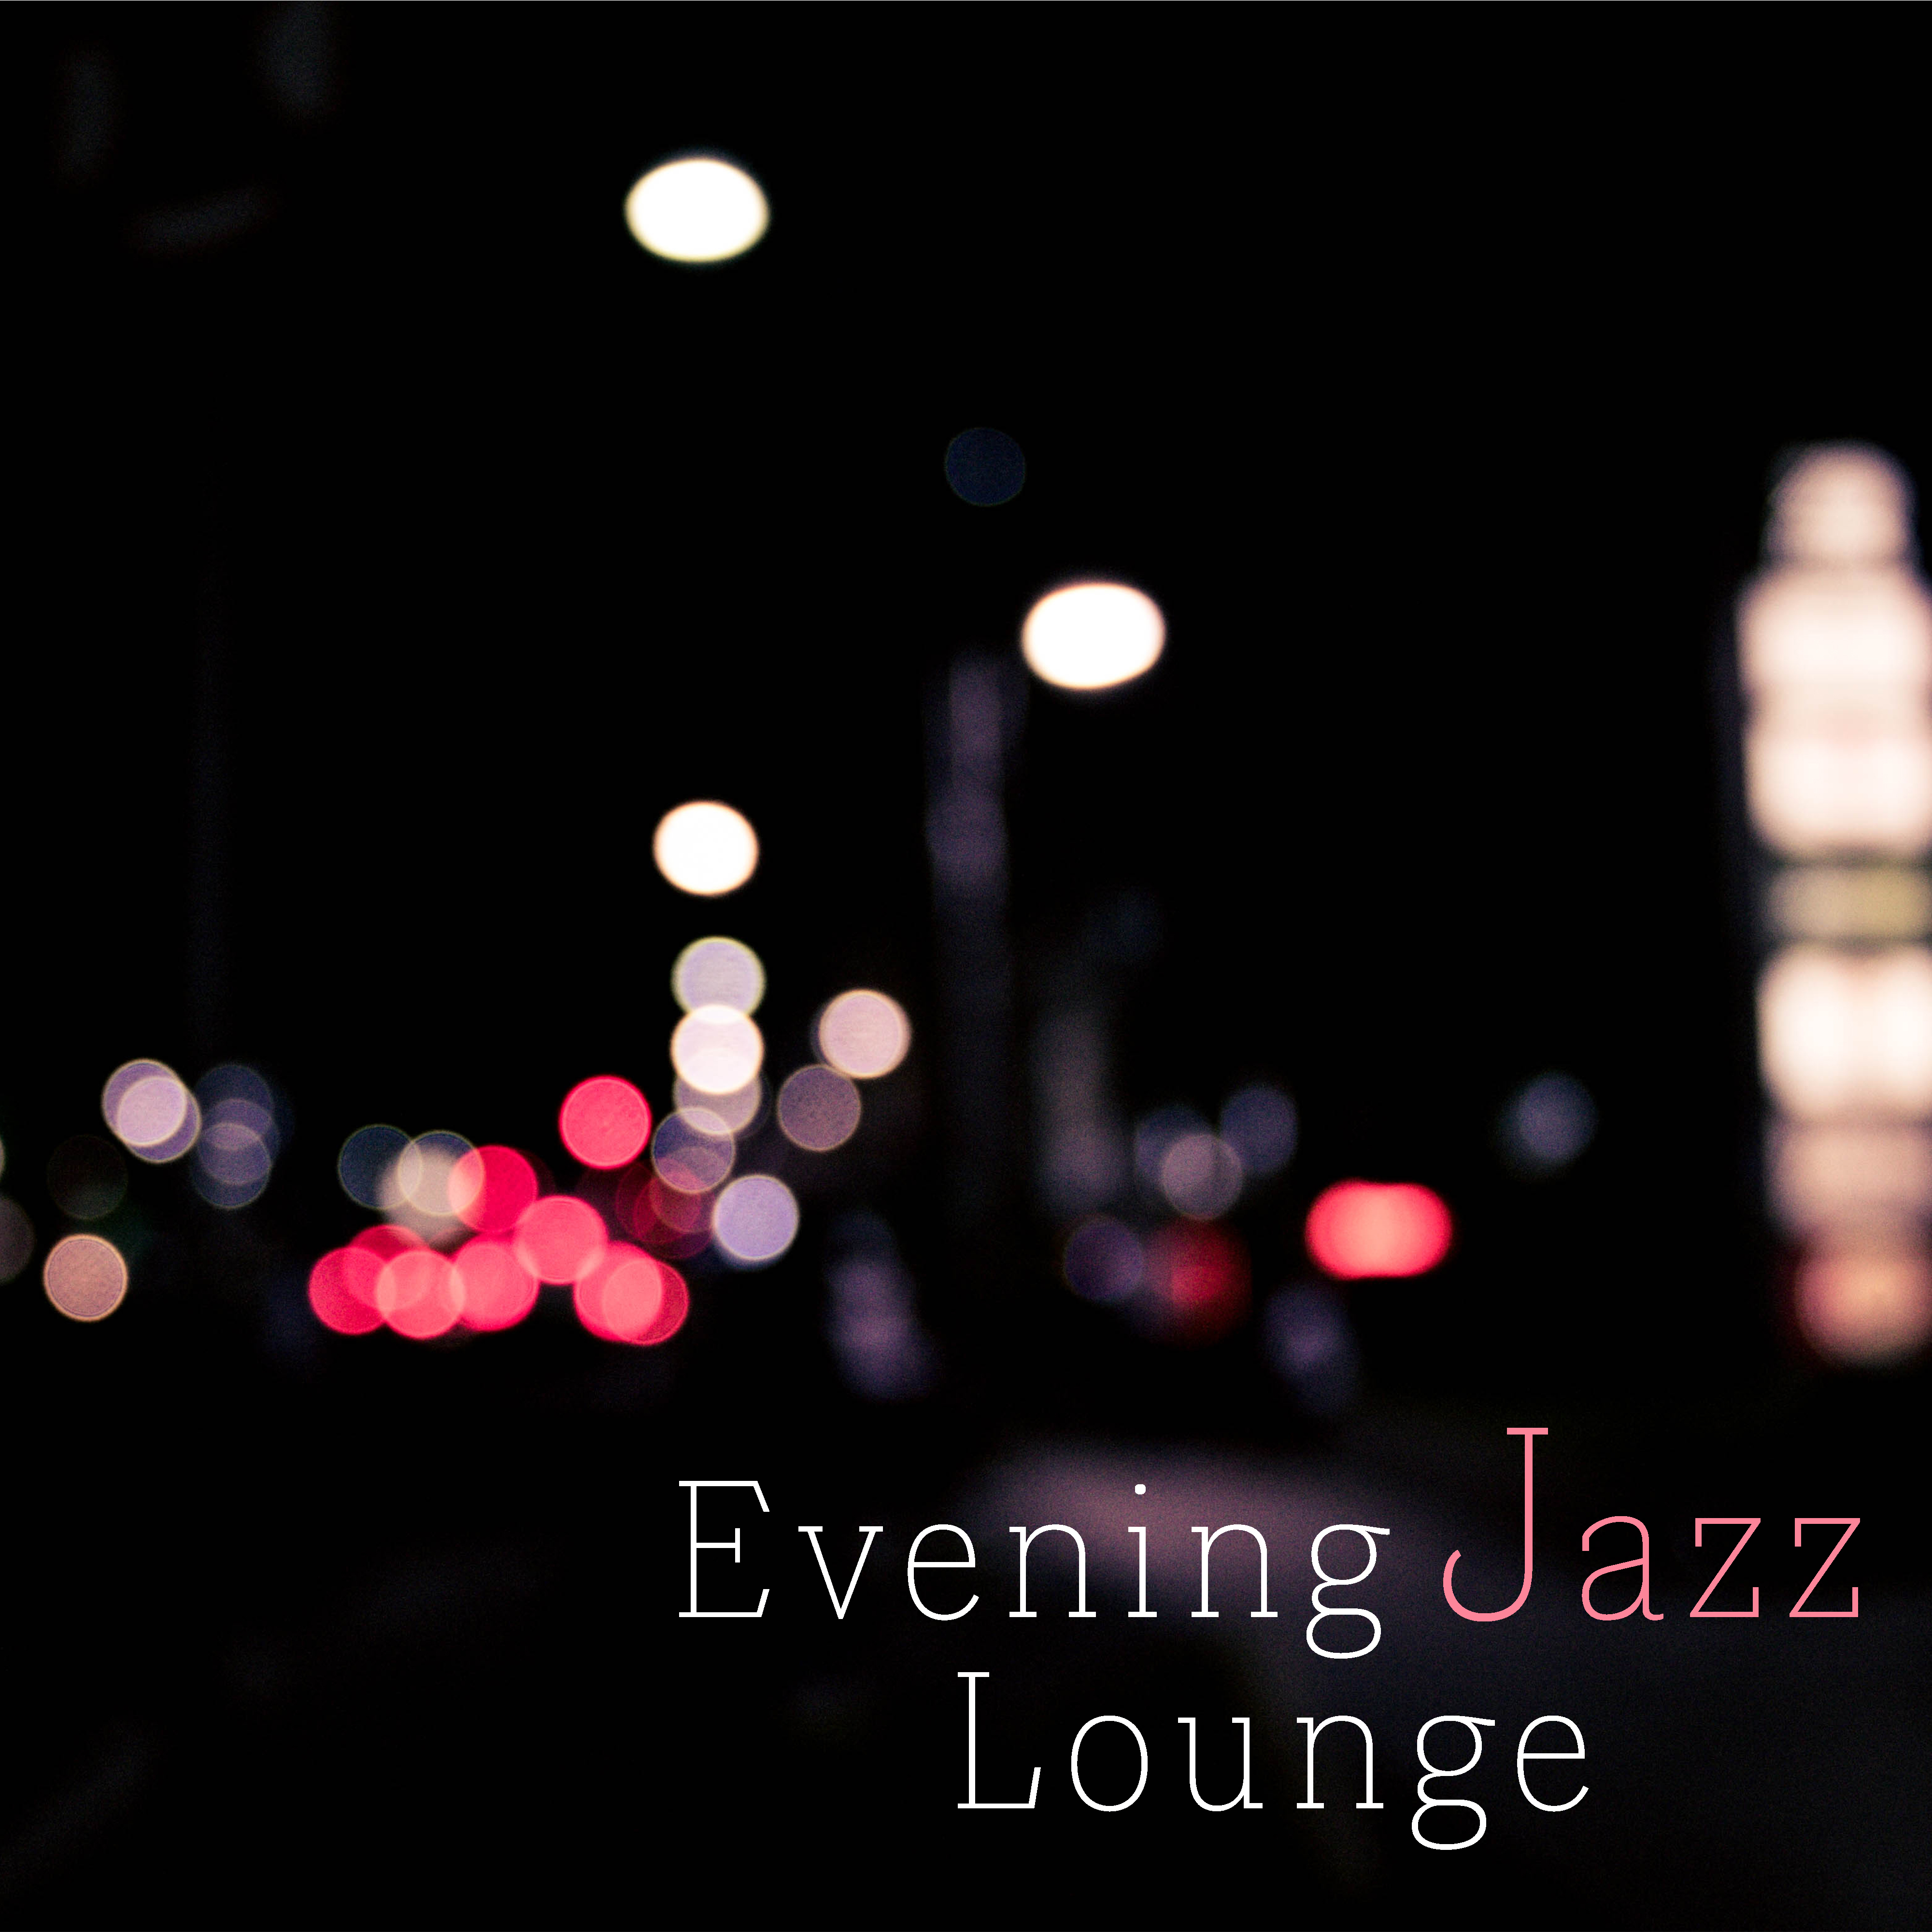 Evening Jazz Lounge  Calm Sounds of Jazz, Shades of Piano, Moonlight Sounds, Evening Relaxation